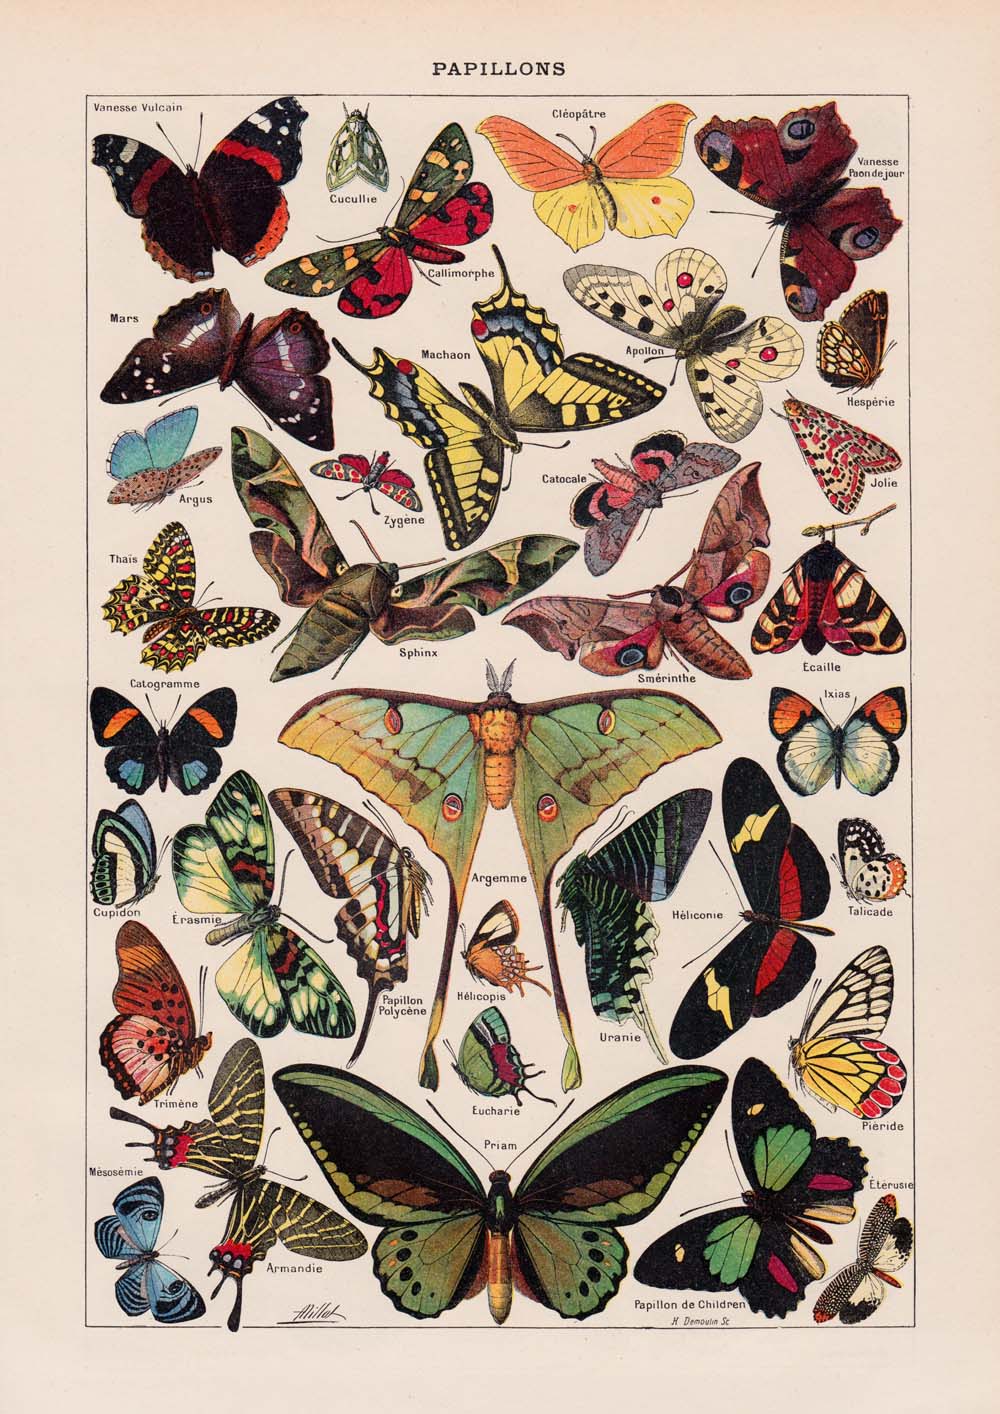 Vintage Butterfly Posters "PAPILLONS" Set of 3 Prints